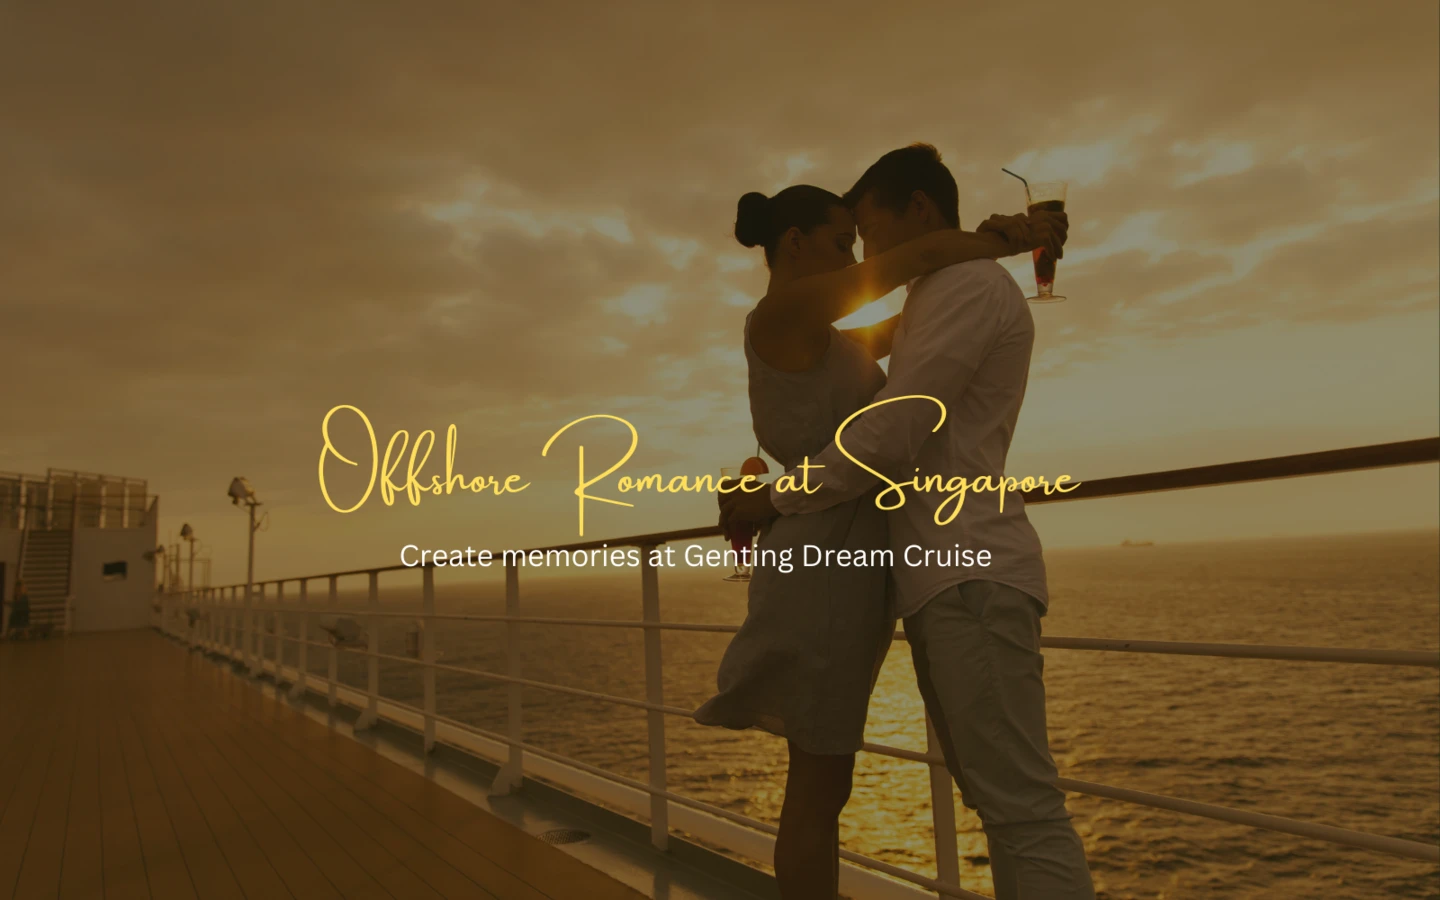 Offshore Romance at Singapore - Genting Dream Cruise